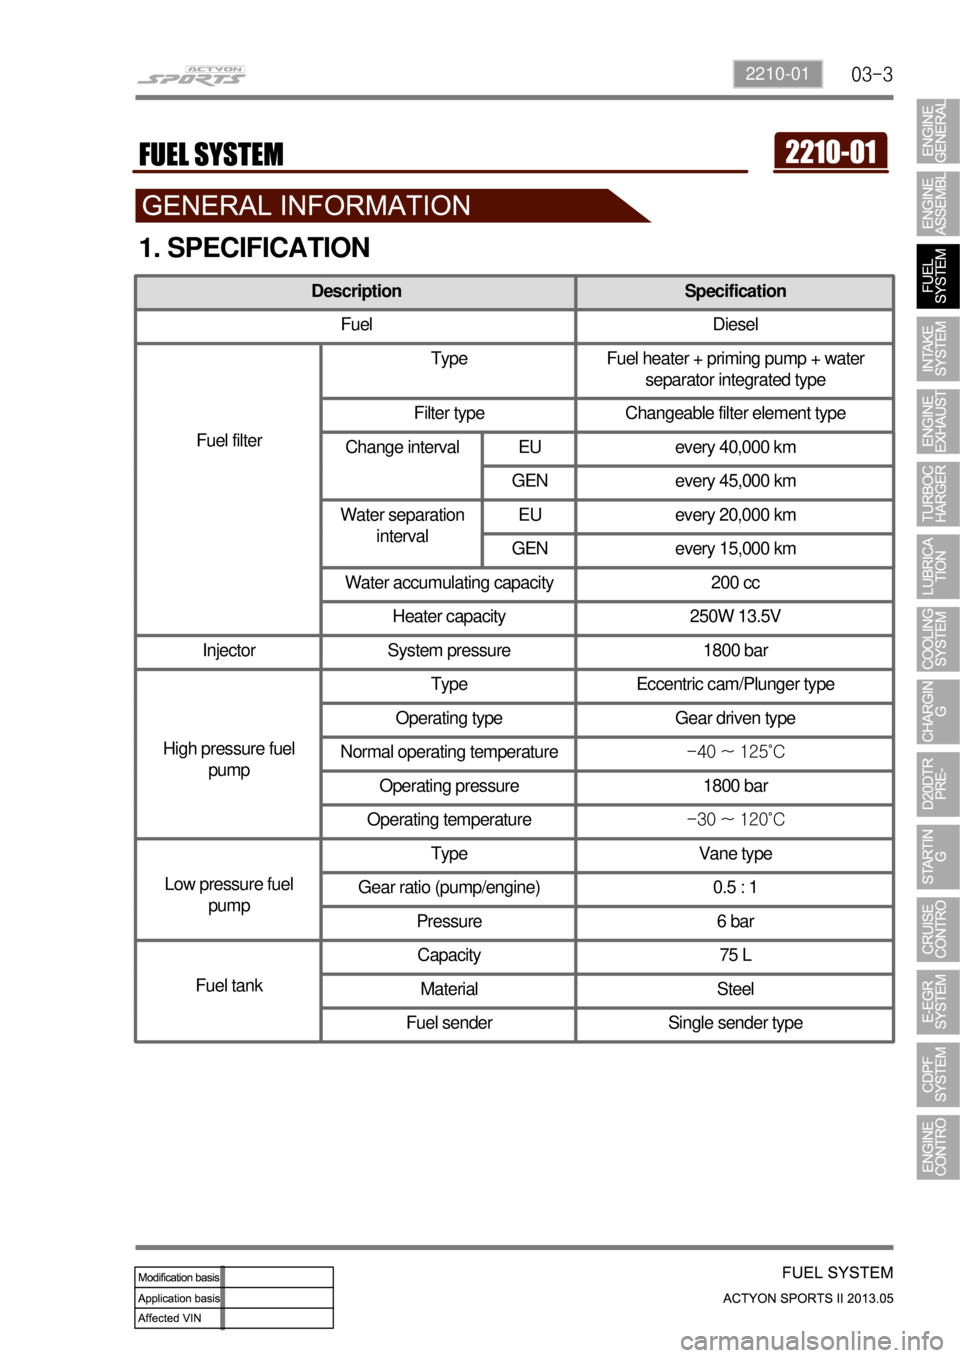 SSANGYONG NEW ACTYON SPORTS 2013  Service Manual 03-32210-01
1. SPECIFICATION
Description Specification
Fuel Diesel
Fuel filterType Fuel heater + priming pump + water 
separator integrated type
Filter type Changeable filter element type
Water accumu